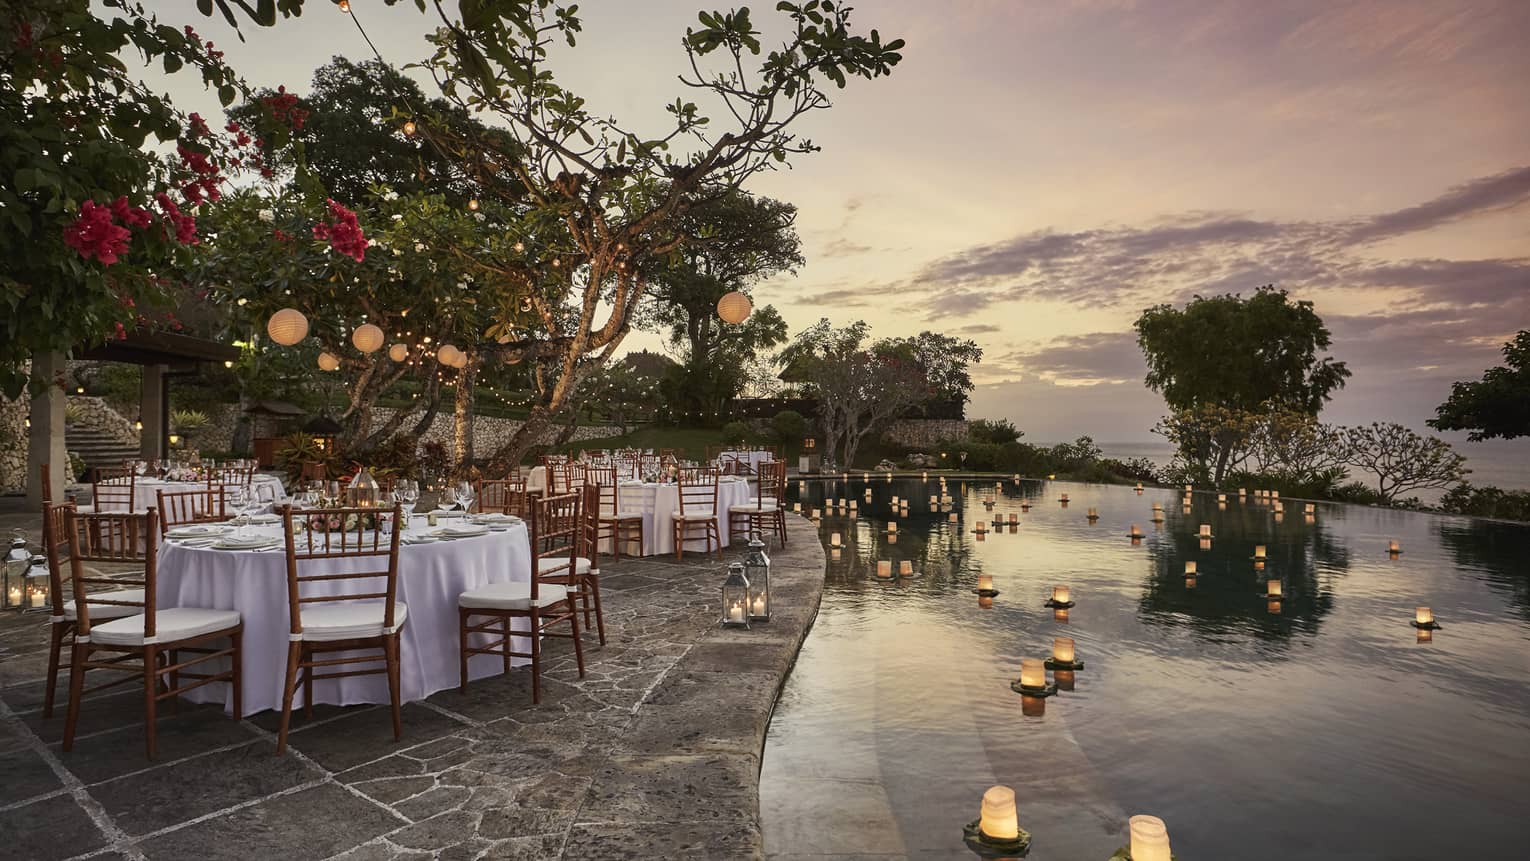 Pool Terrace banquet dining tables by candles floating on water at sunset